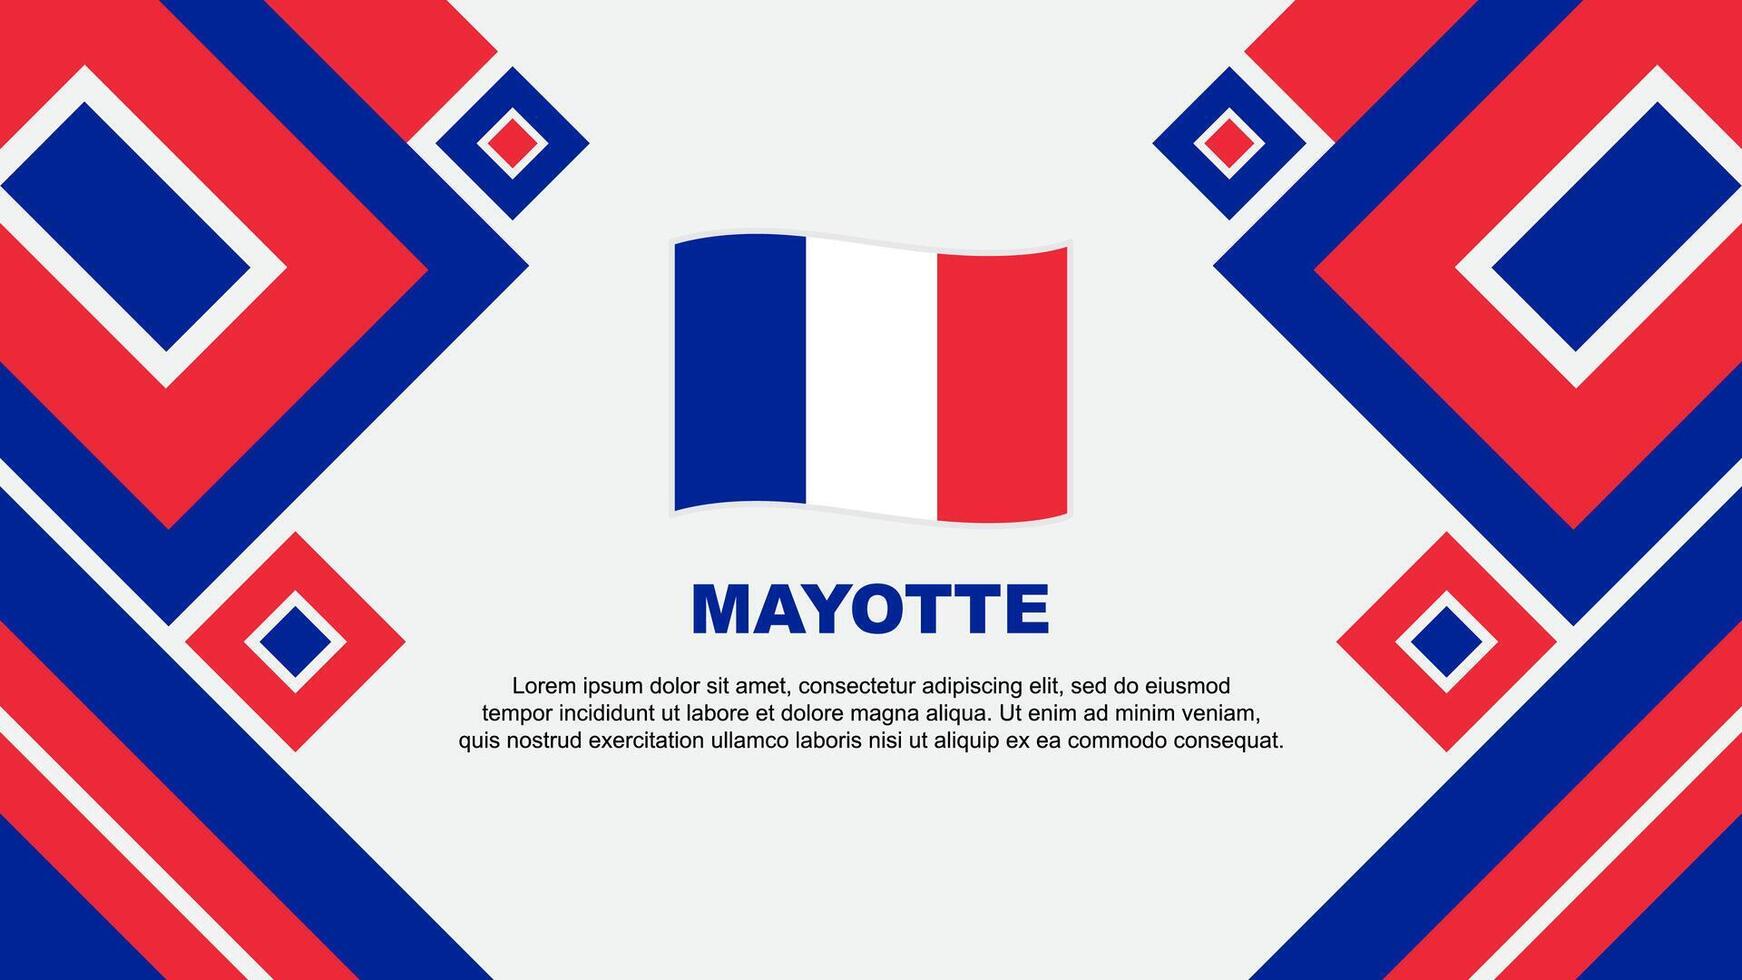 Mayotte Flag Abstract Background Design Template. Mayotte Independence Day Banner Wallpaper Vector Illustration. Cartoon